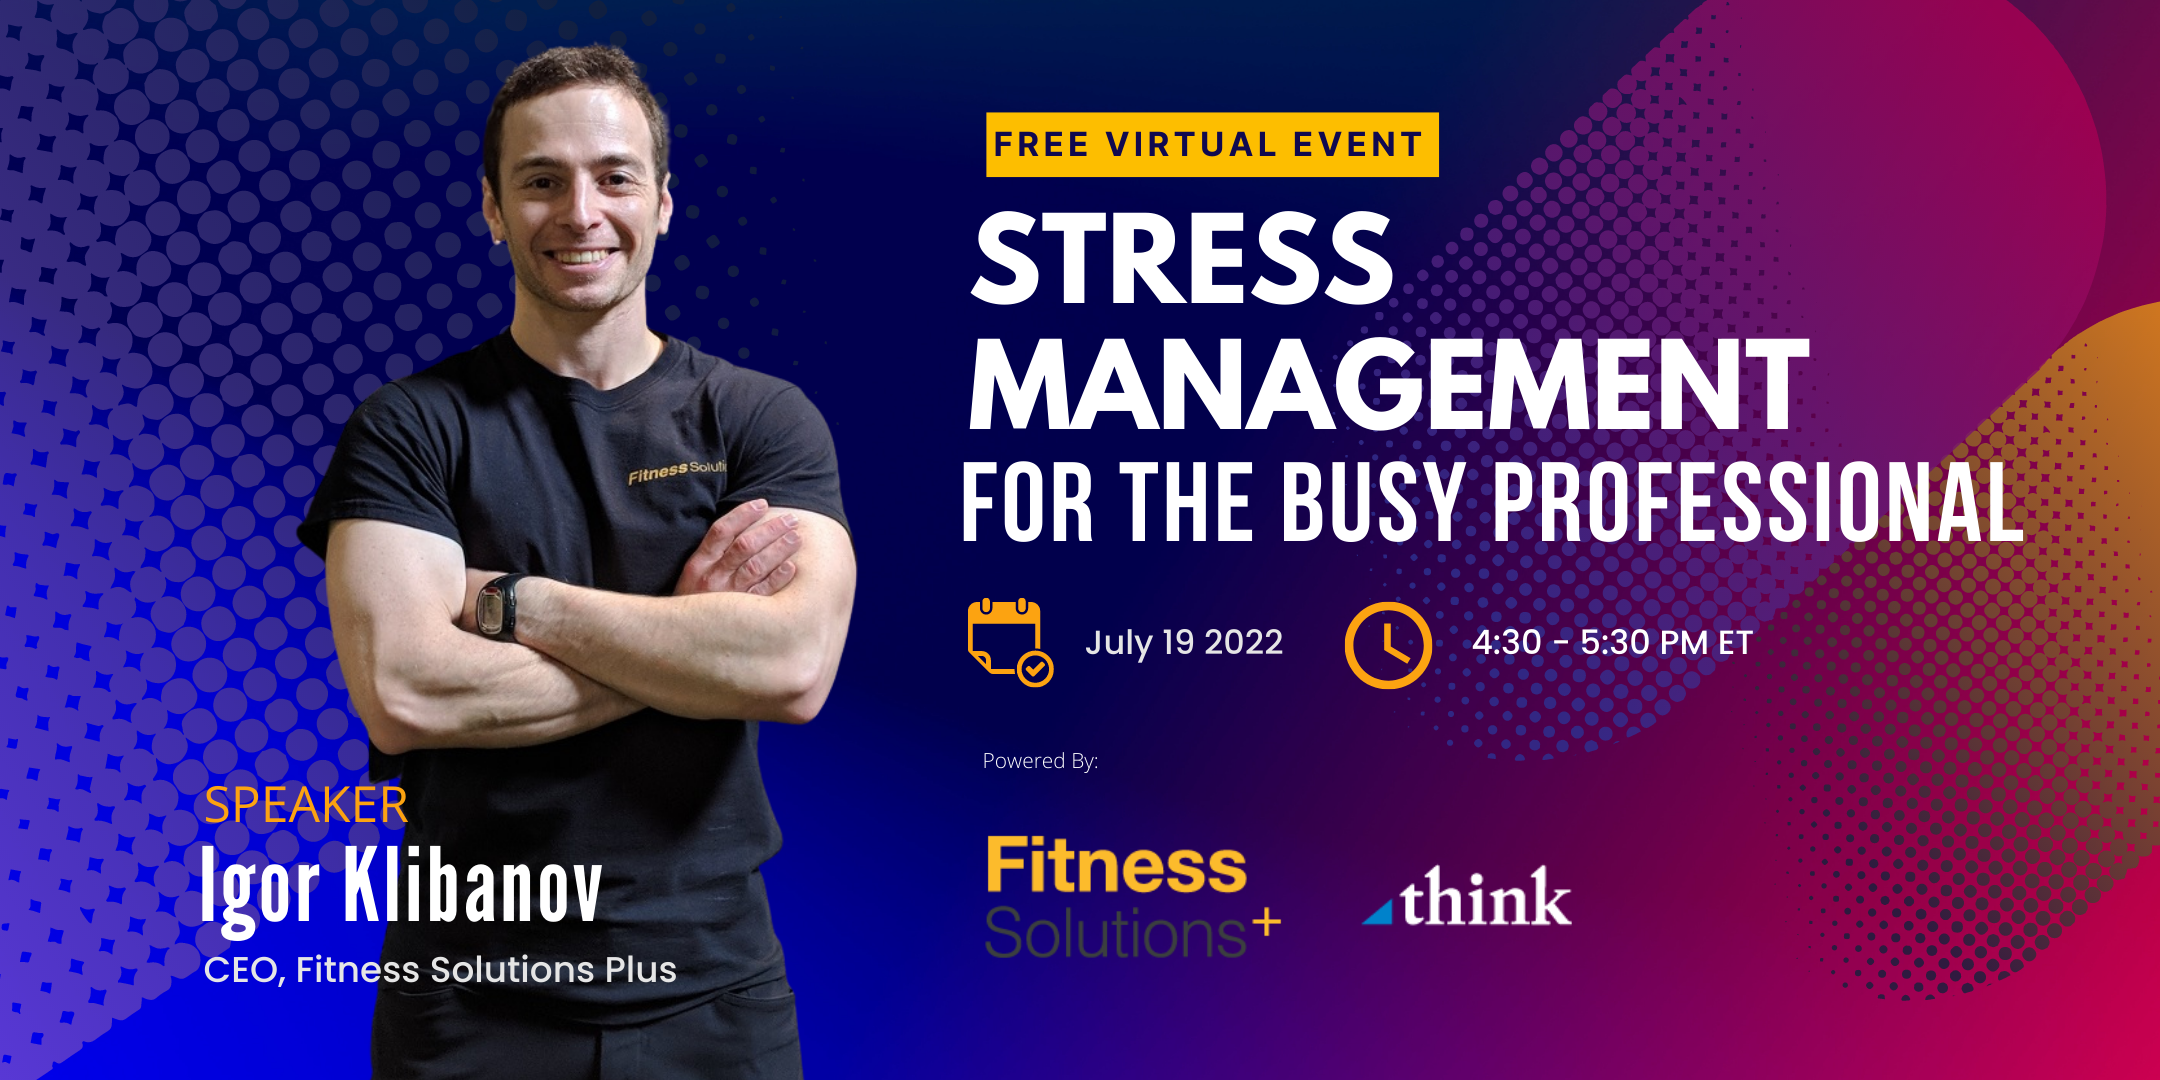 Stress management for busy professionals